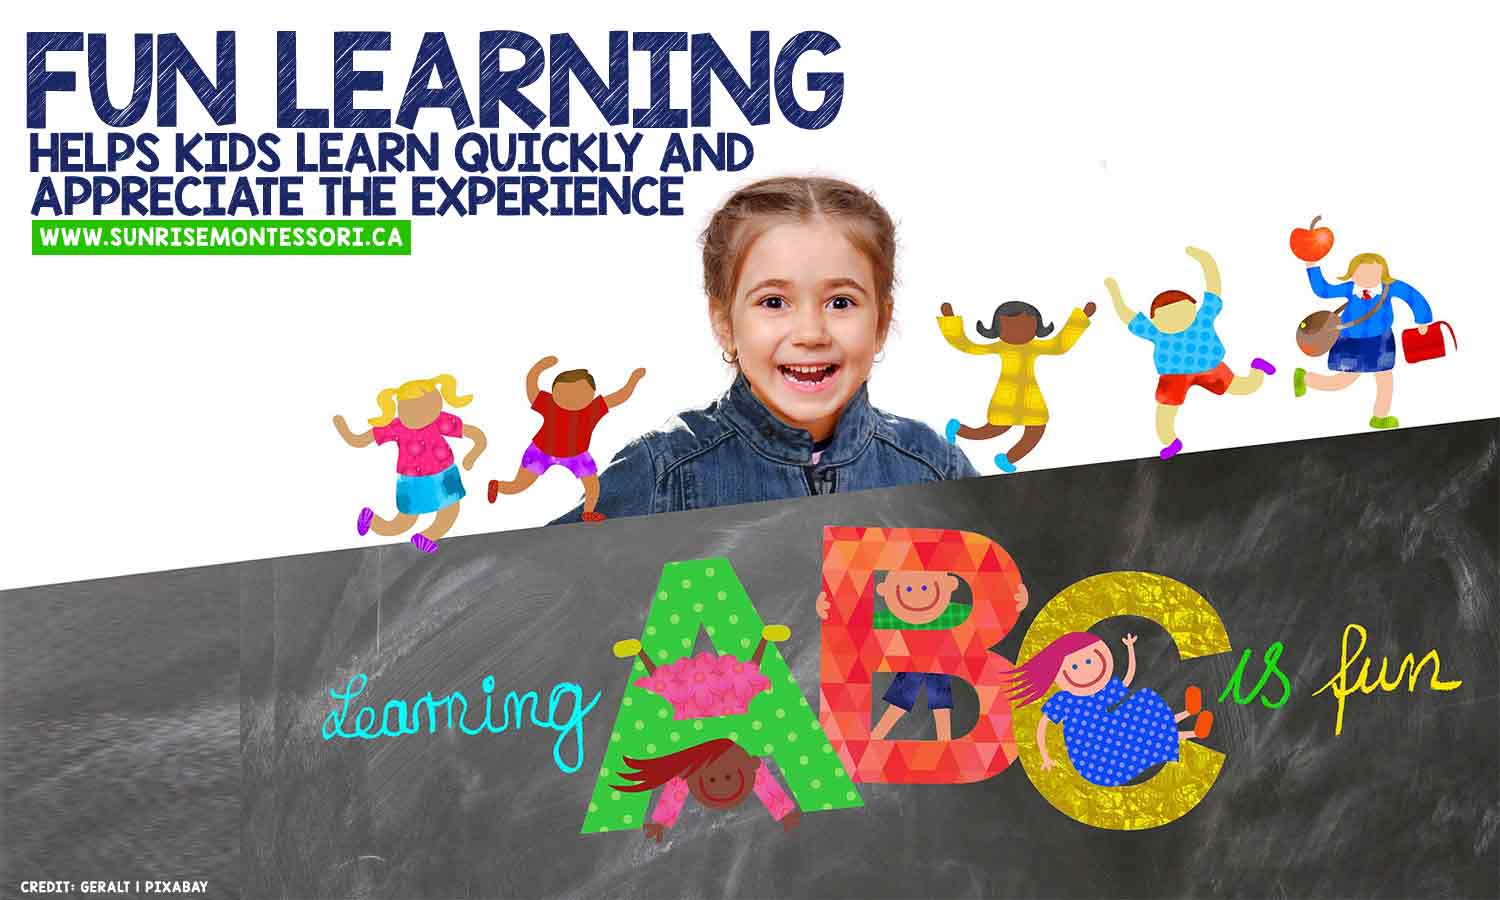 Fun learning helps kids learn quickly and appreciate the experience